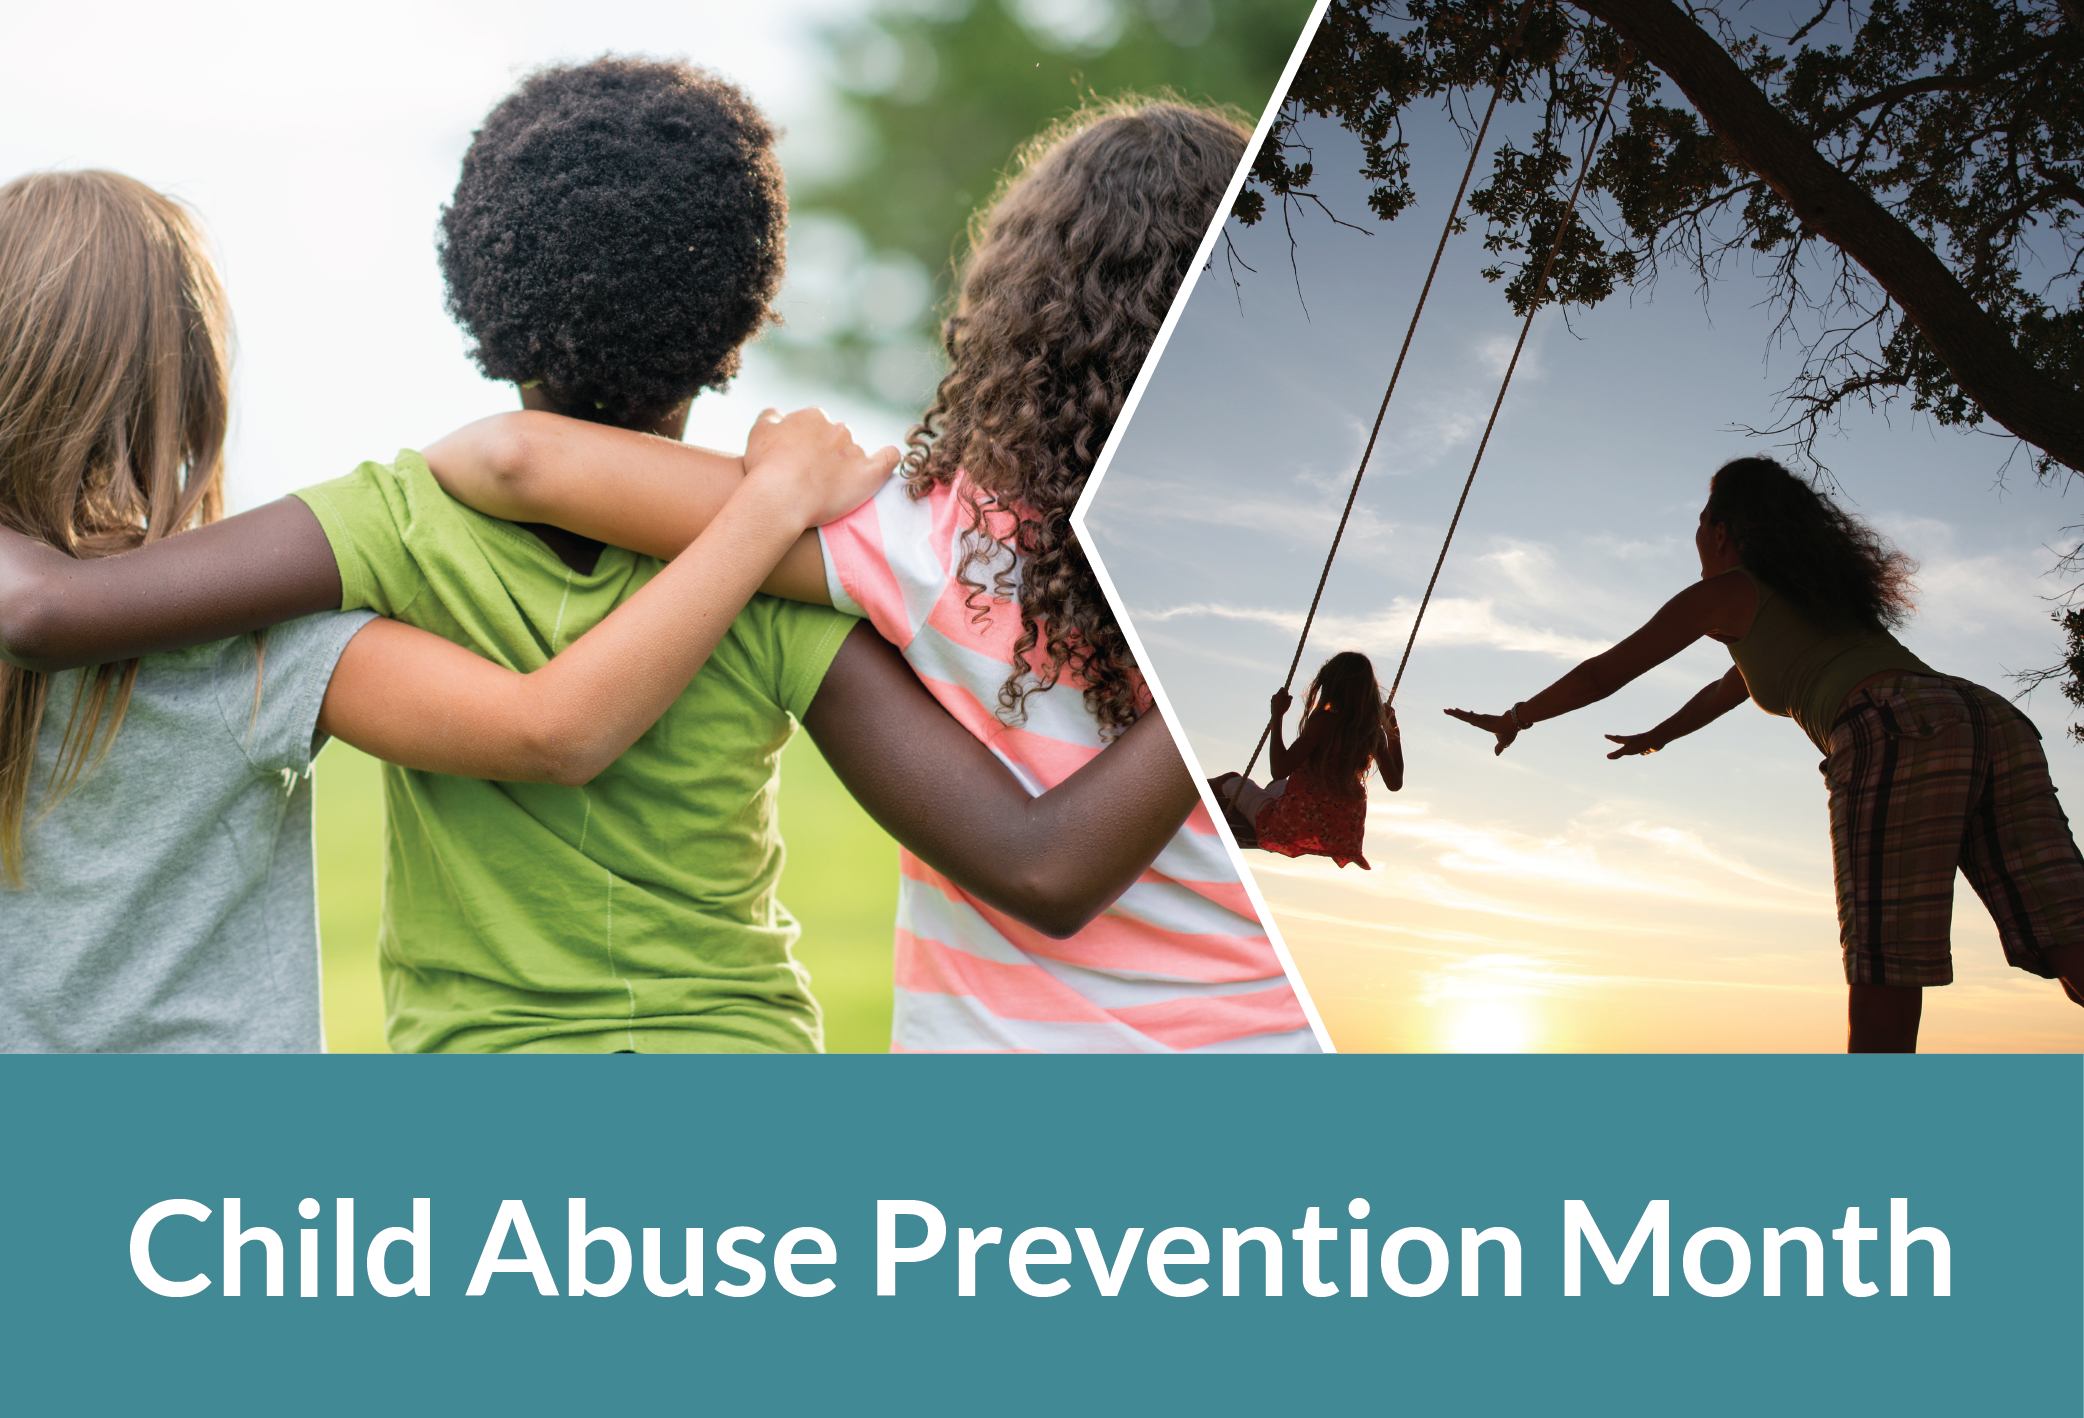 Child Abuse Prevention Month Resources Image